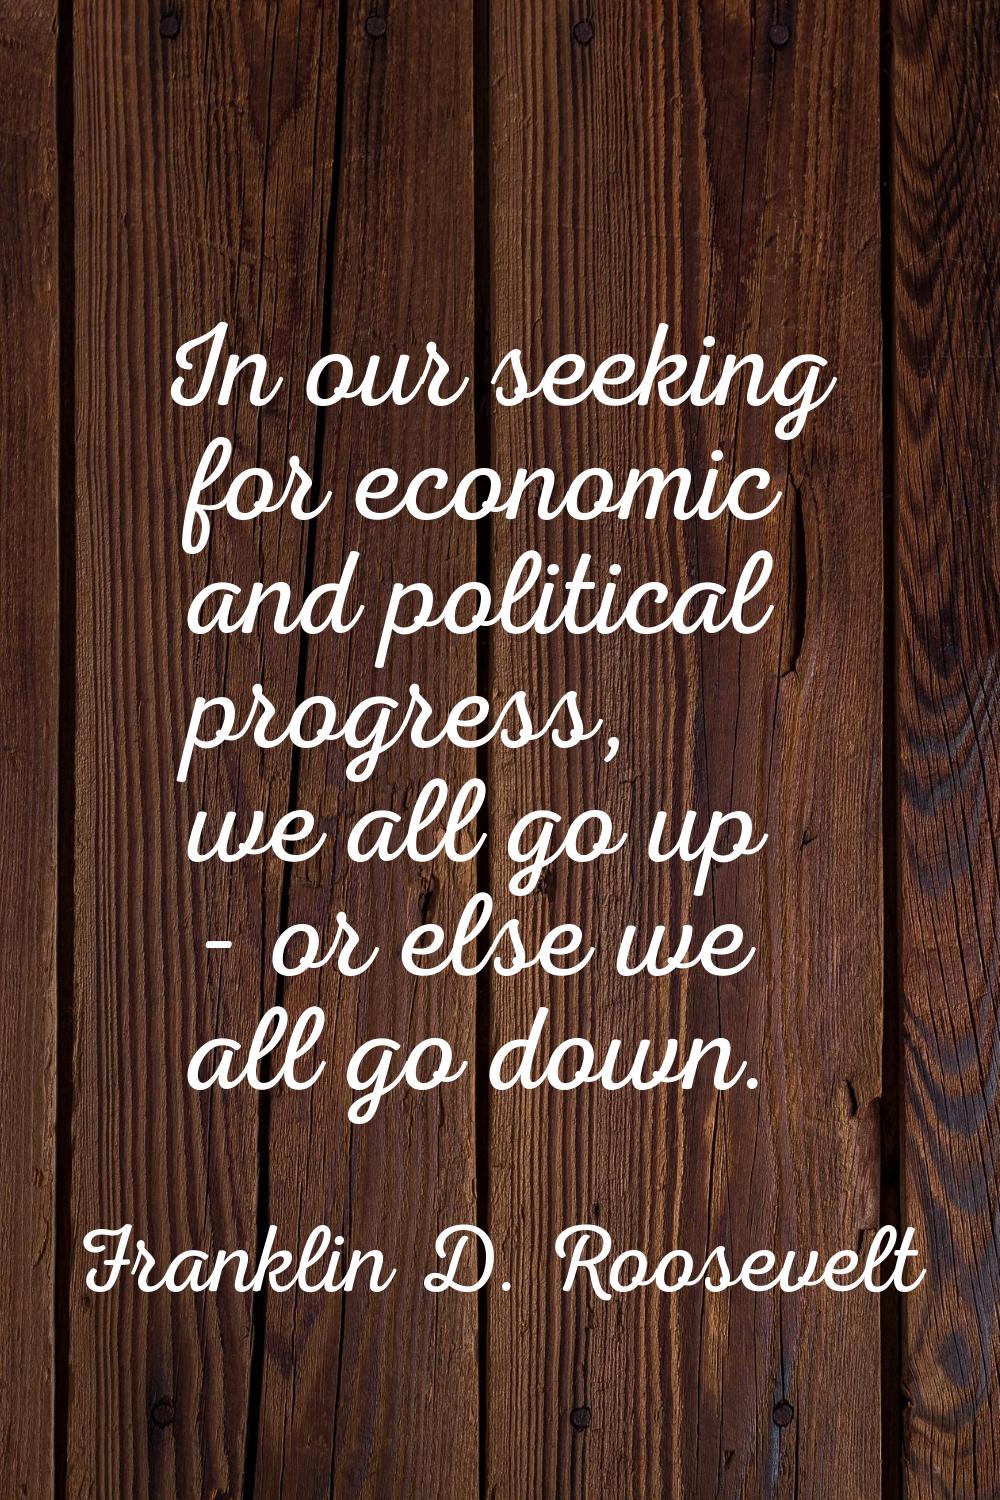 In our seeking for economic and political progress, we all go up - or else we all go down.